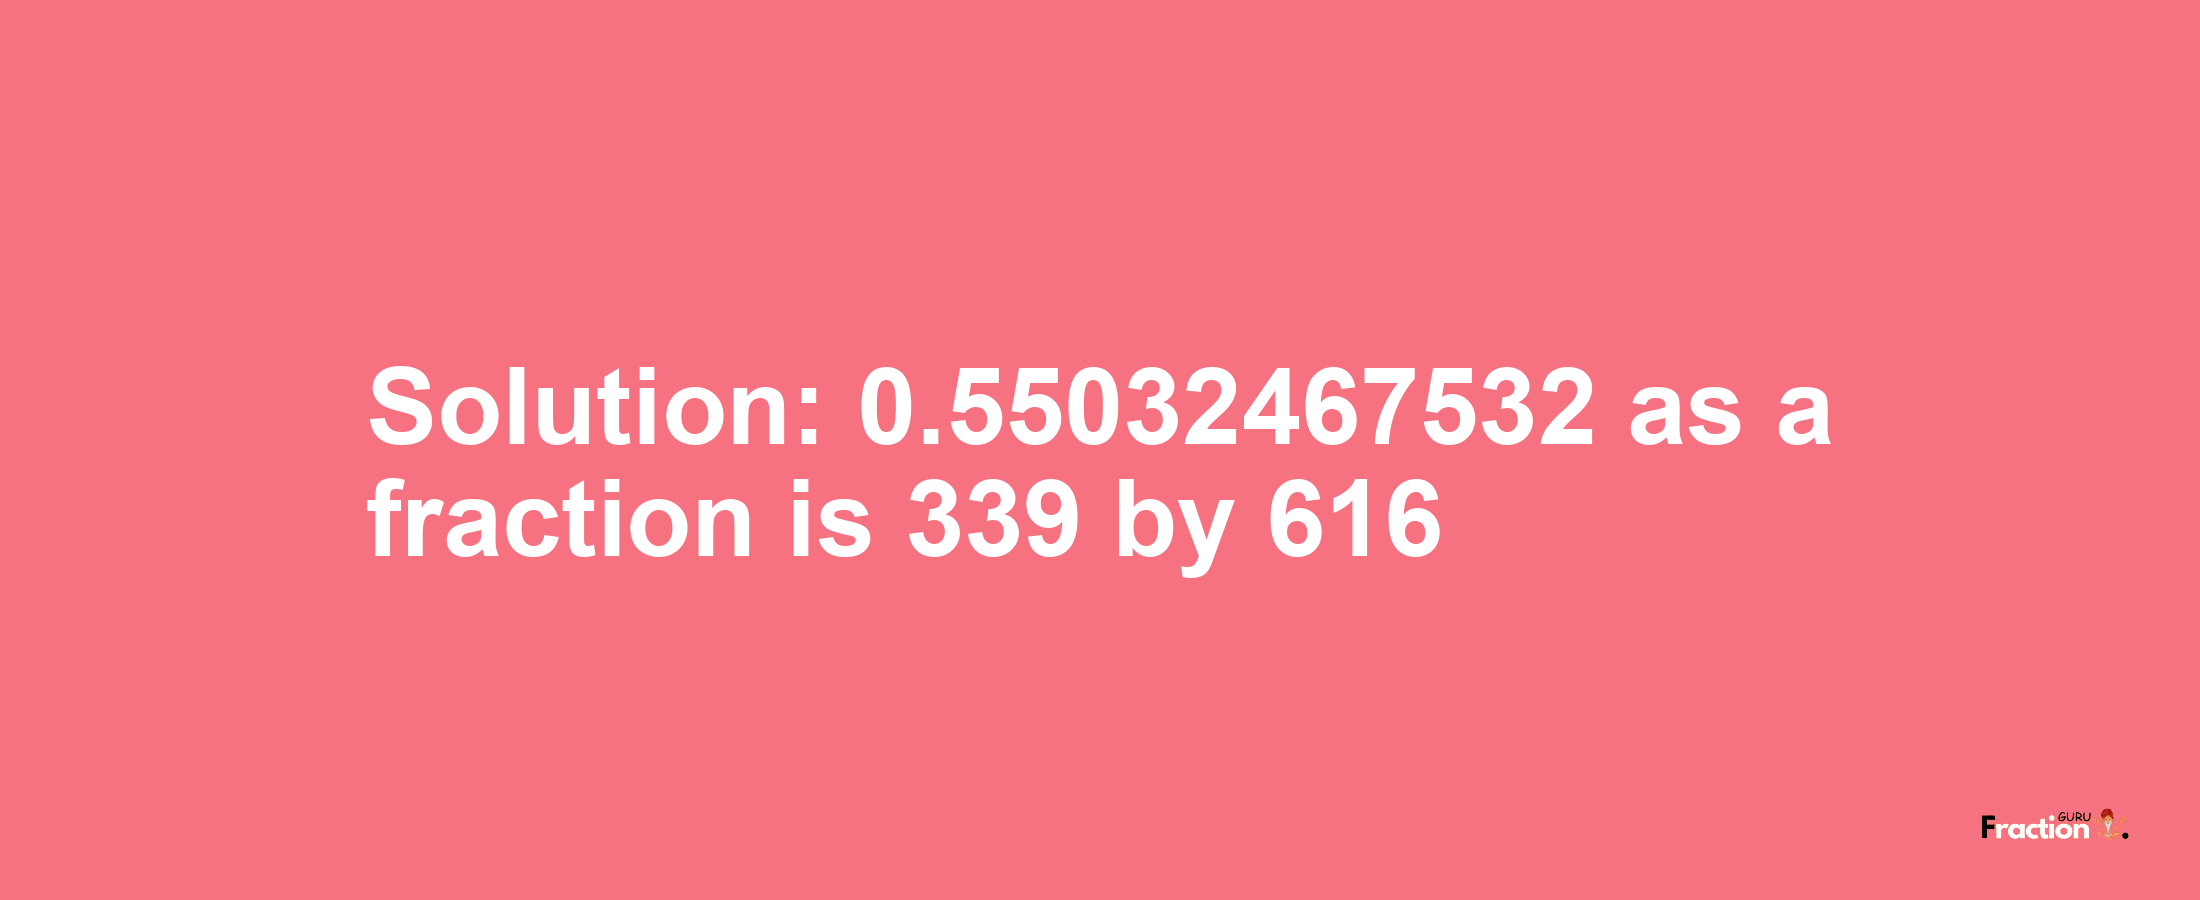 Solution:0.55032467532 as a fraction is 339/616